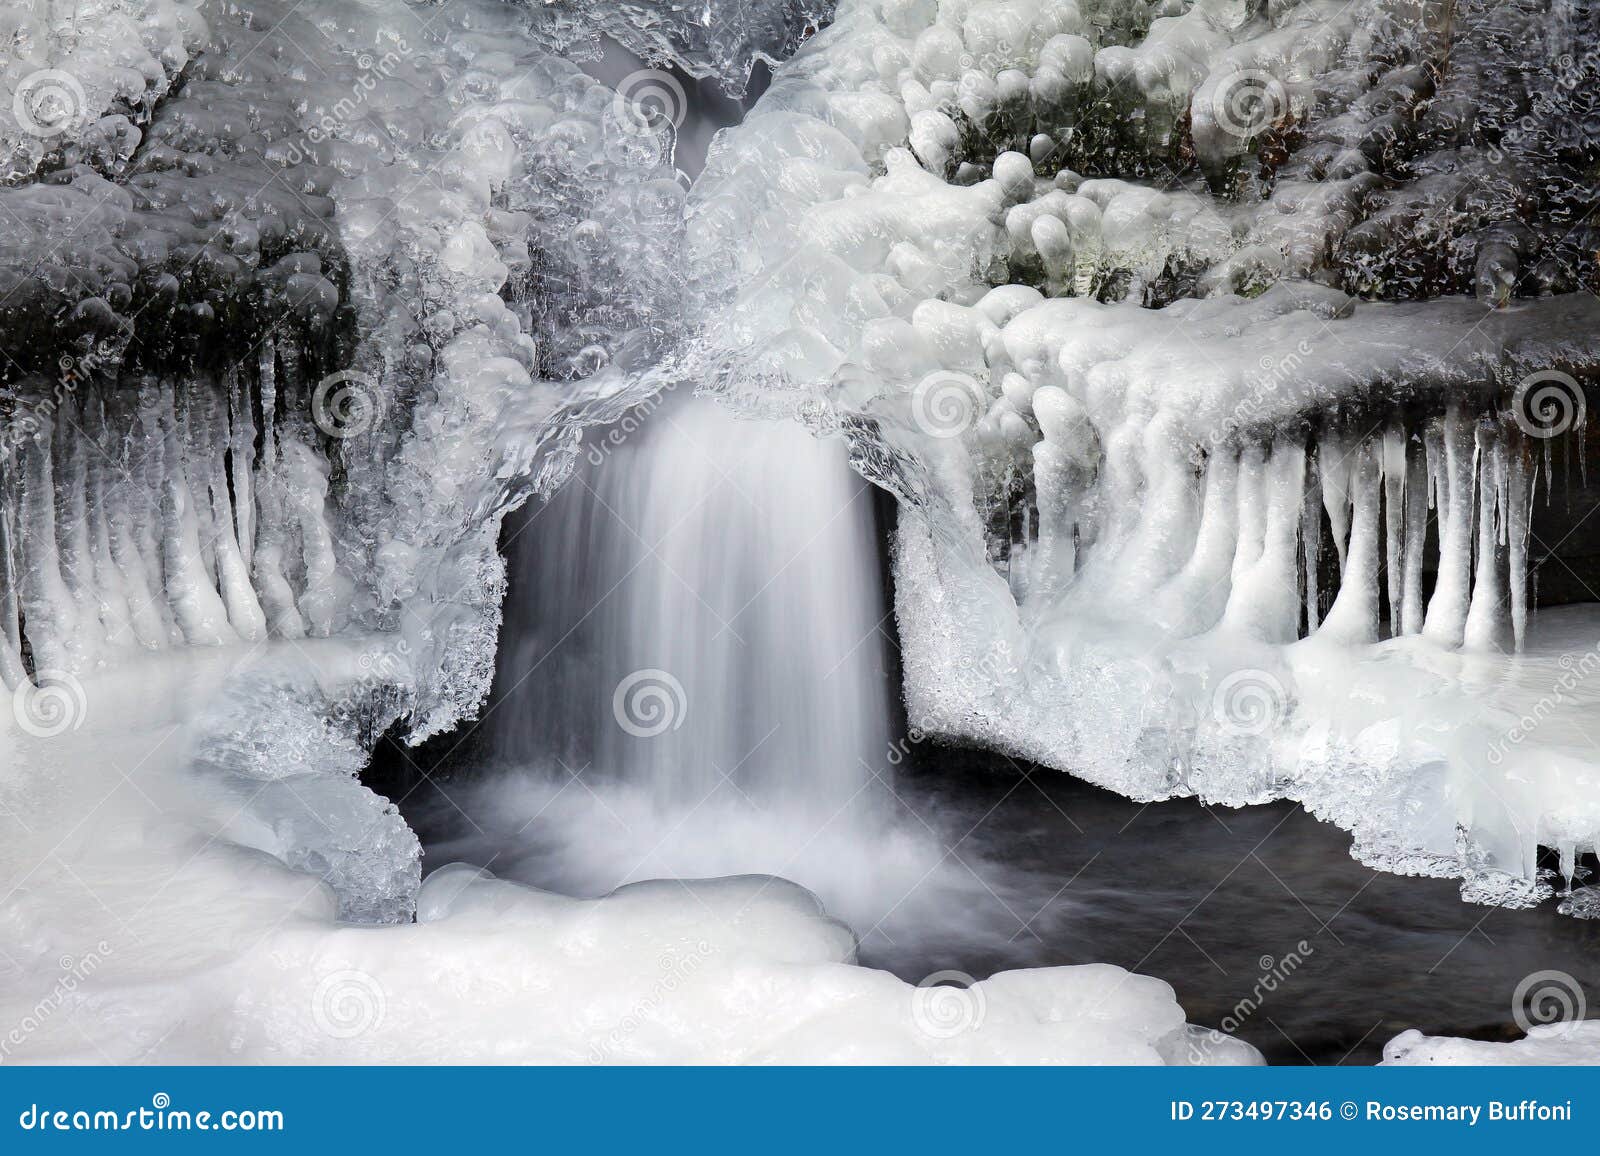 an icescape with veiled flowing water